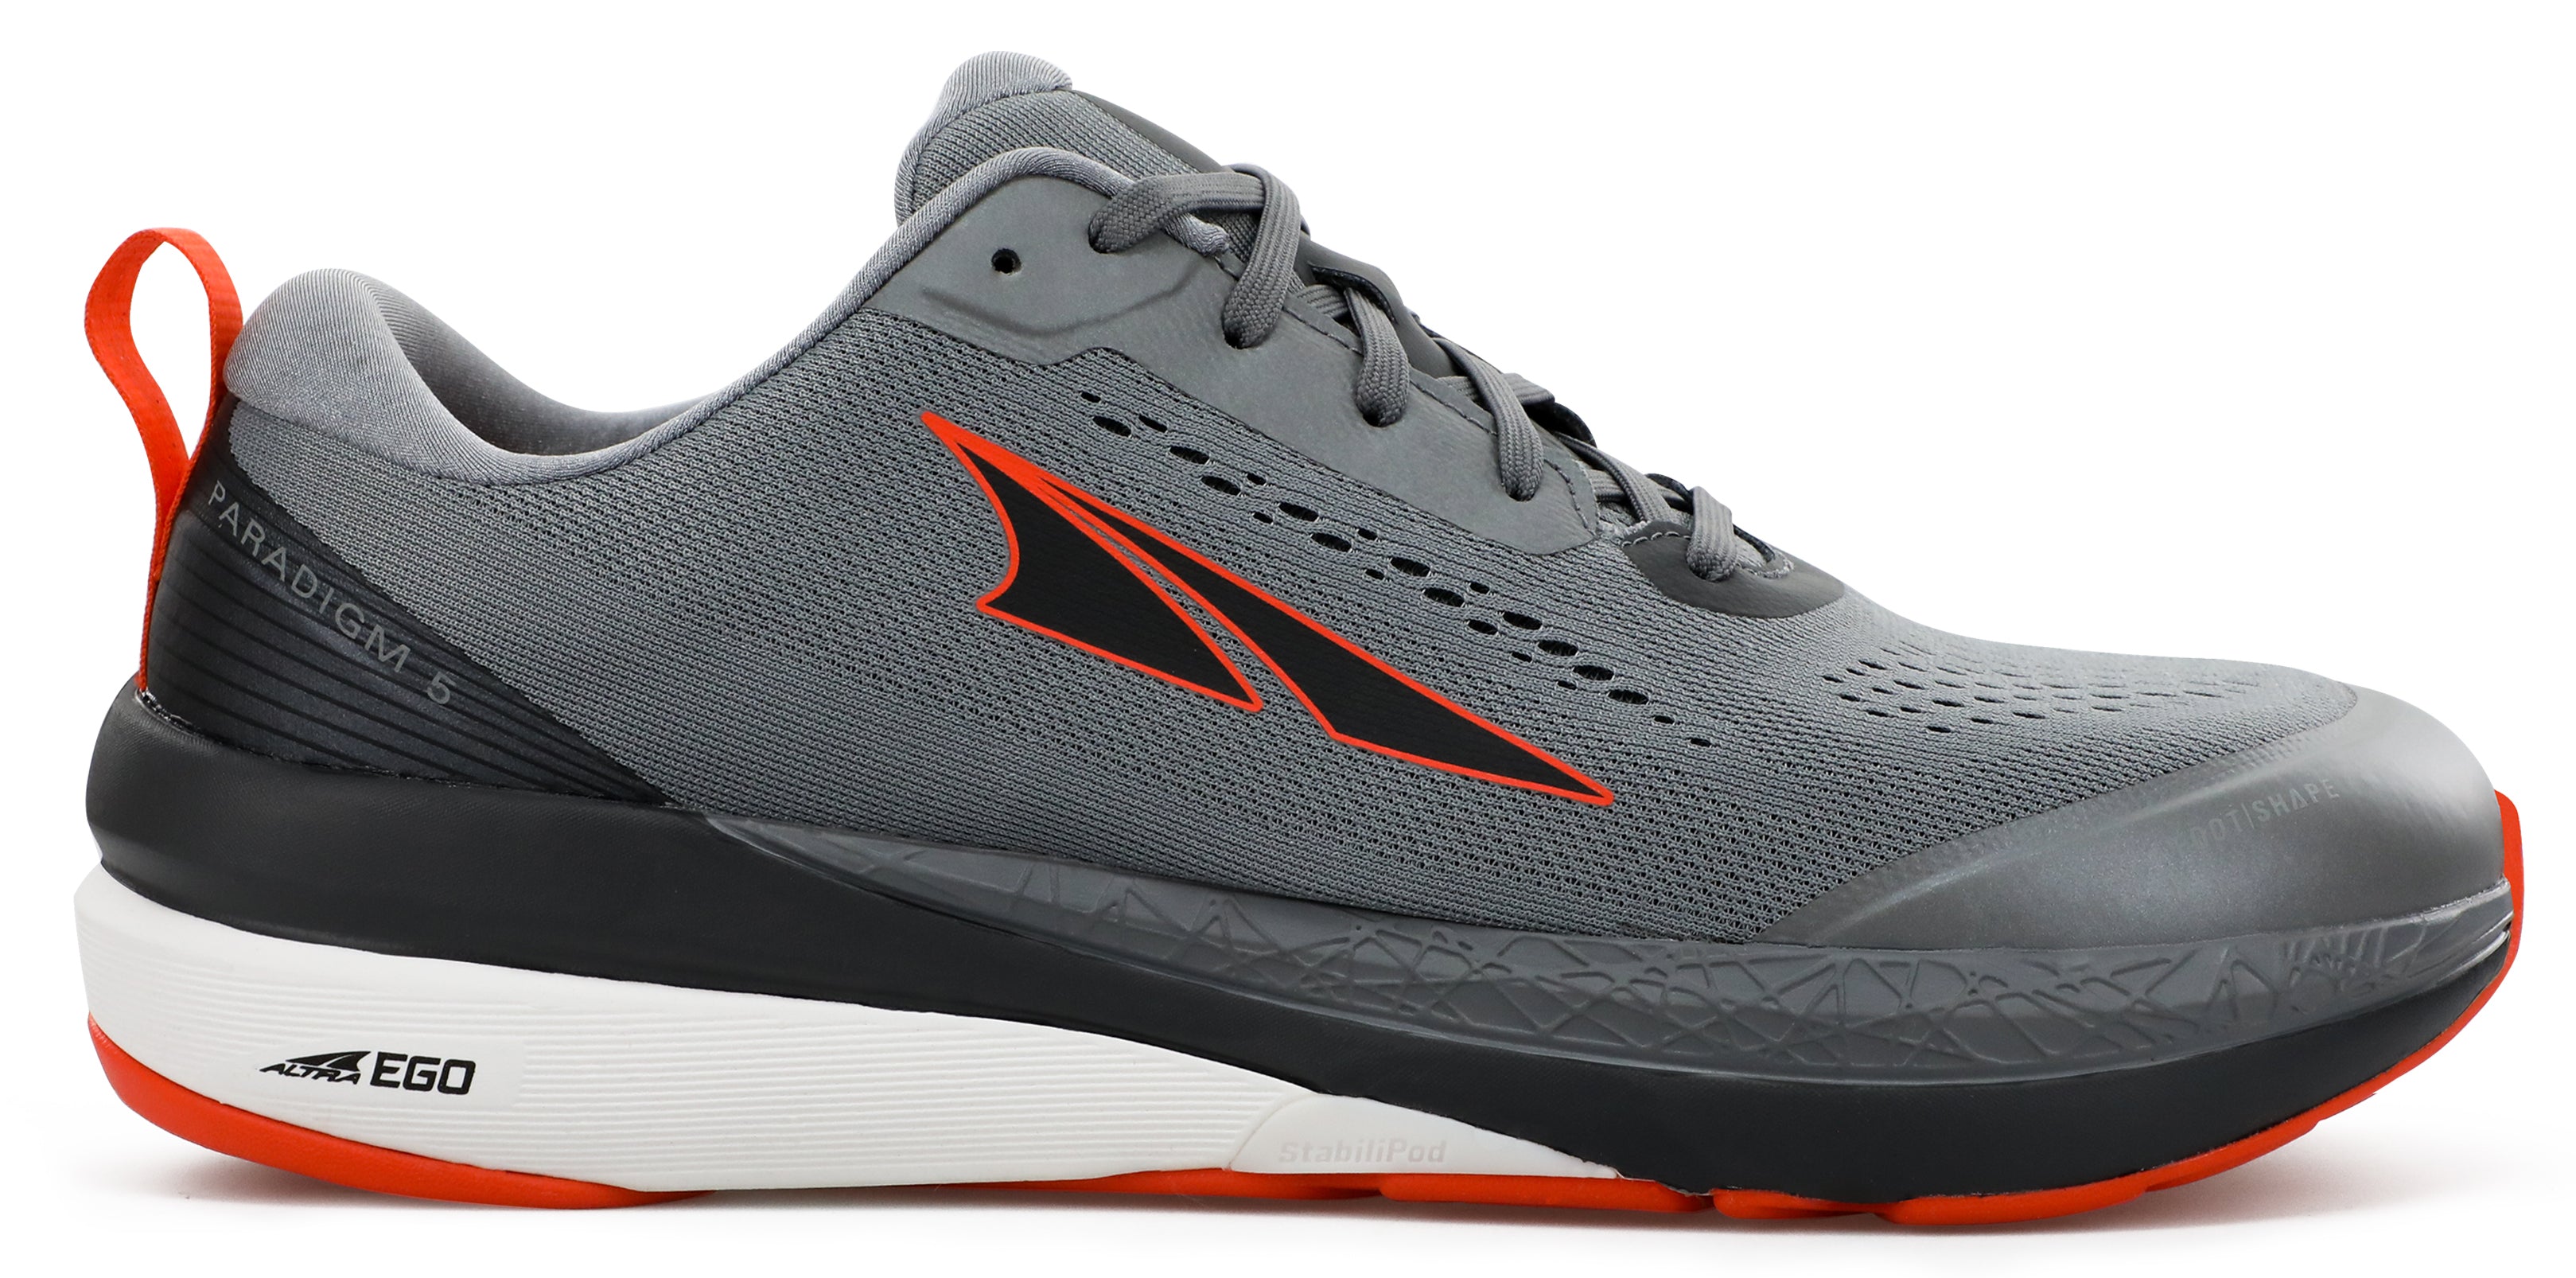 Altra Men's Paradigm 5 Road Running Shoe in Gray/Orange from the side